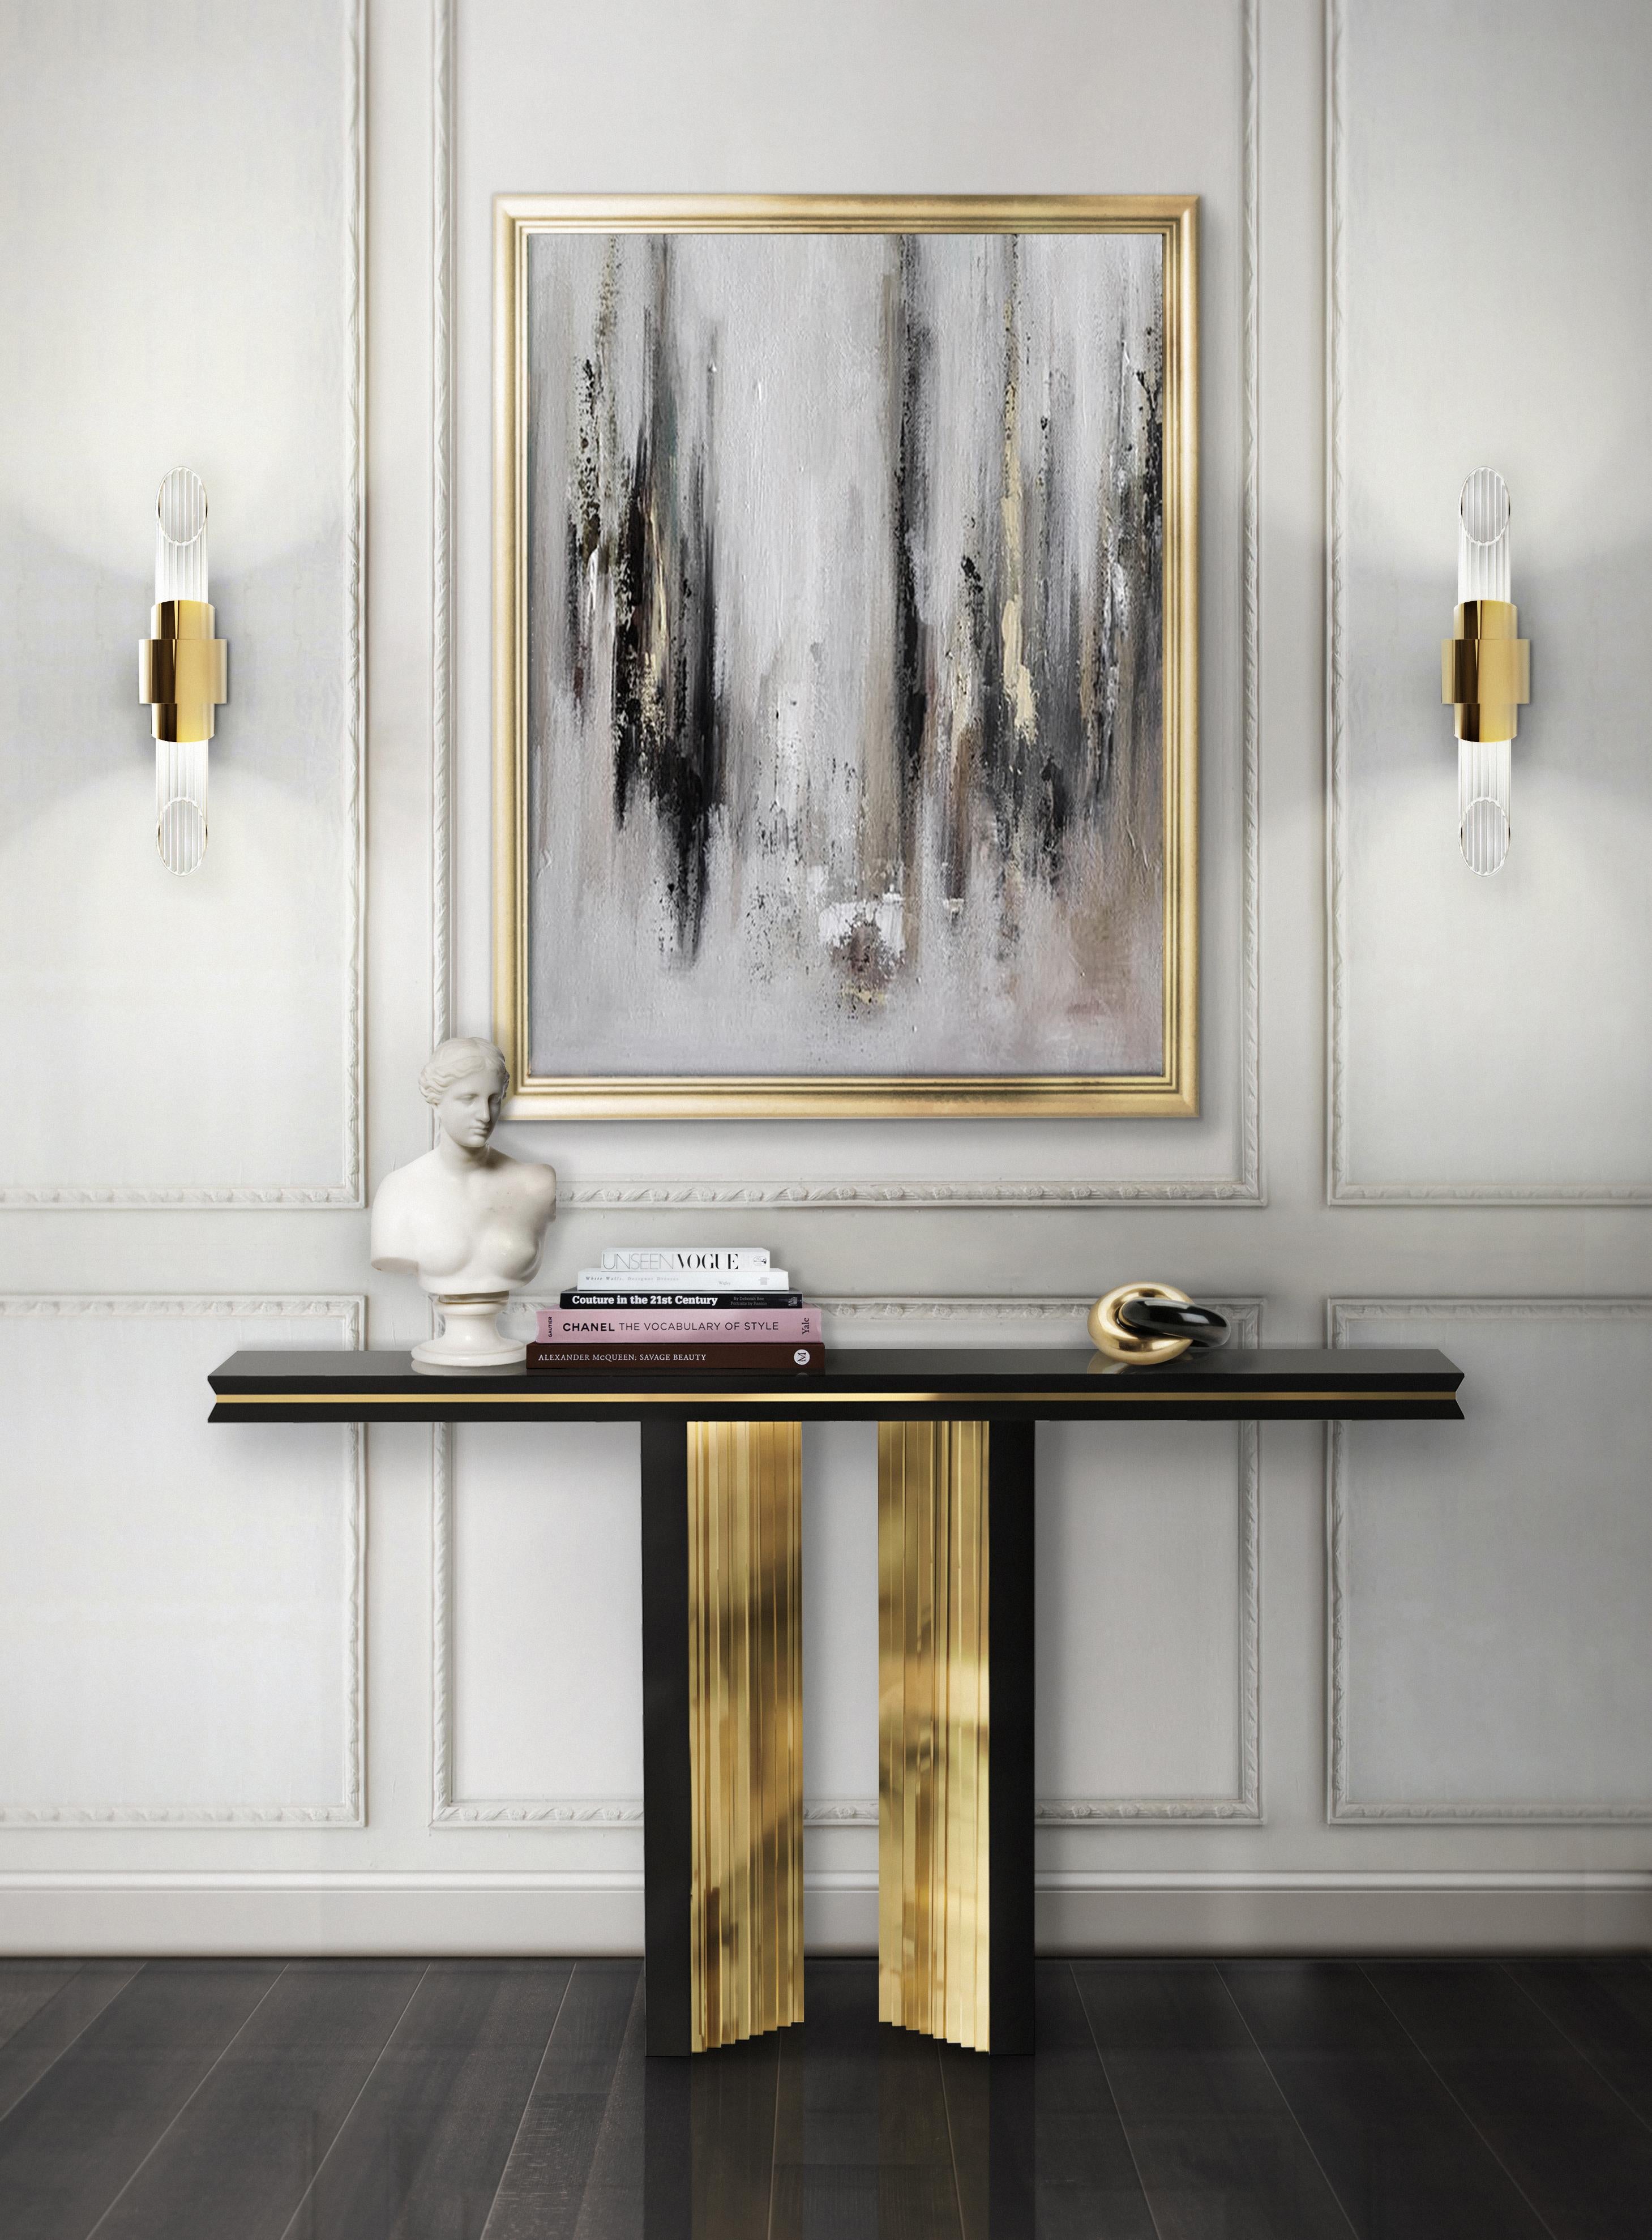 The best handmade techniques find balance in a delicate work in wood softened with touches of brass that reflect warm and golden tones on its polished surface. An impressive display of elegance, Beyond console shows the exquisite capacity to fill a